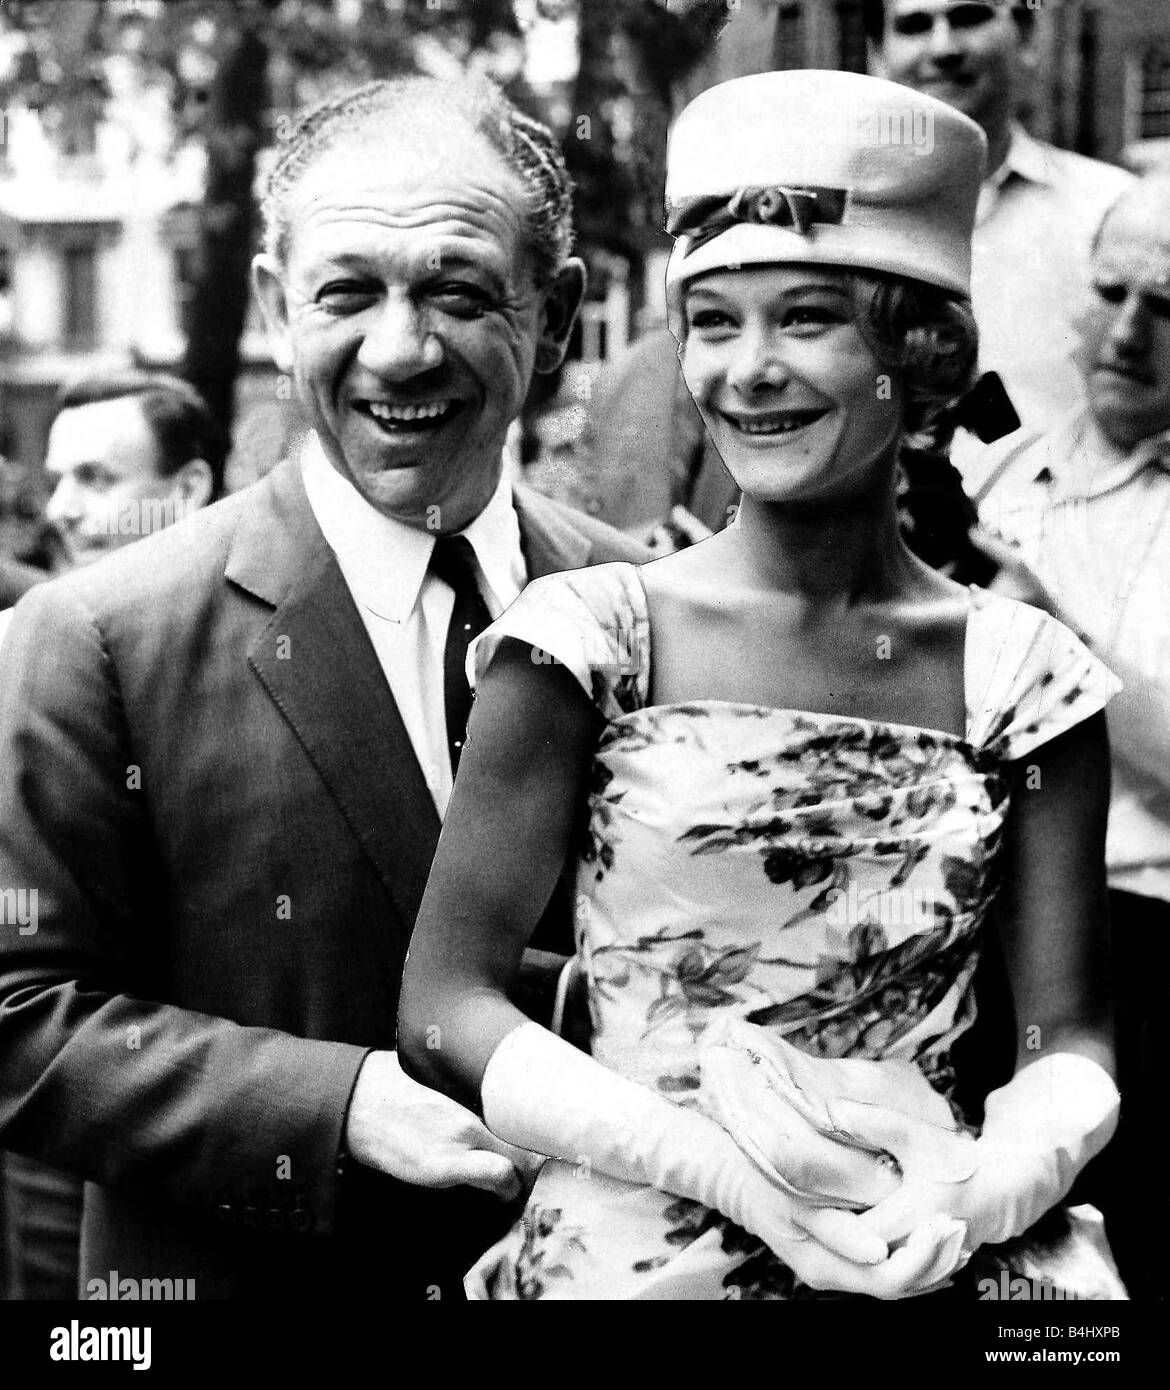 Sid James Comedy Actor Carry On Films at Tommy Steele s Wedding with wife Stock Photo